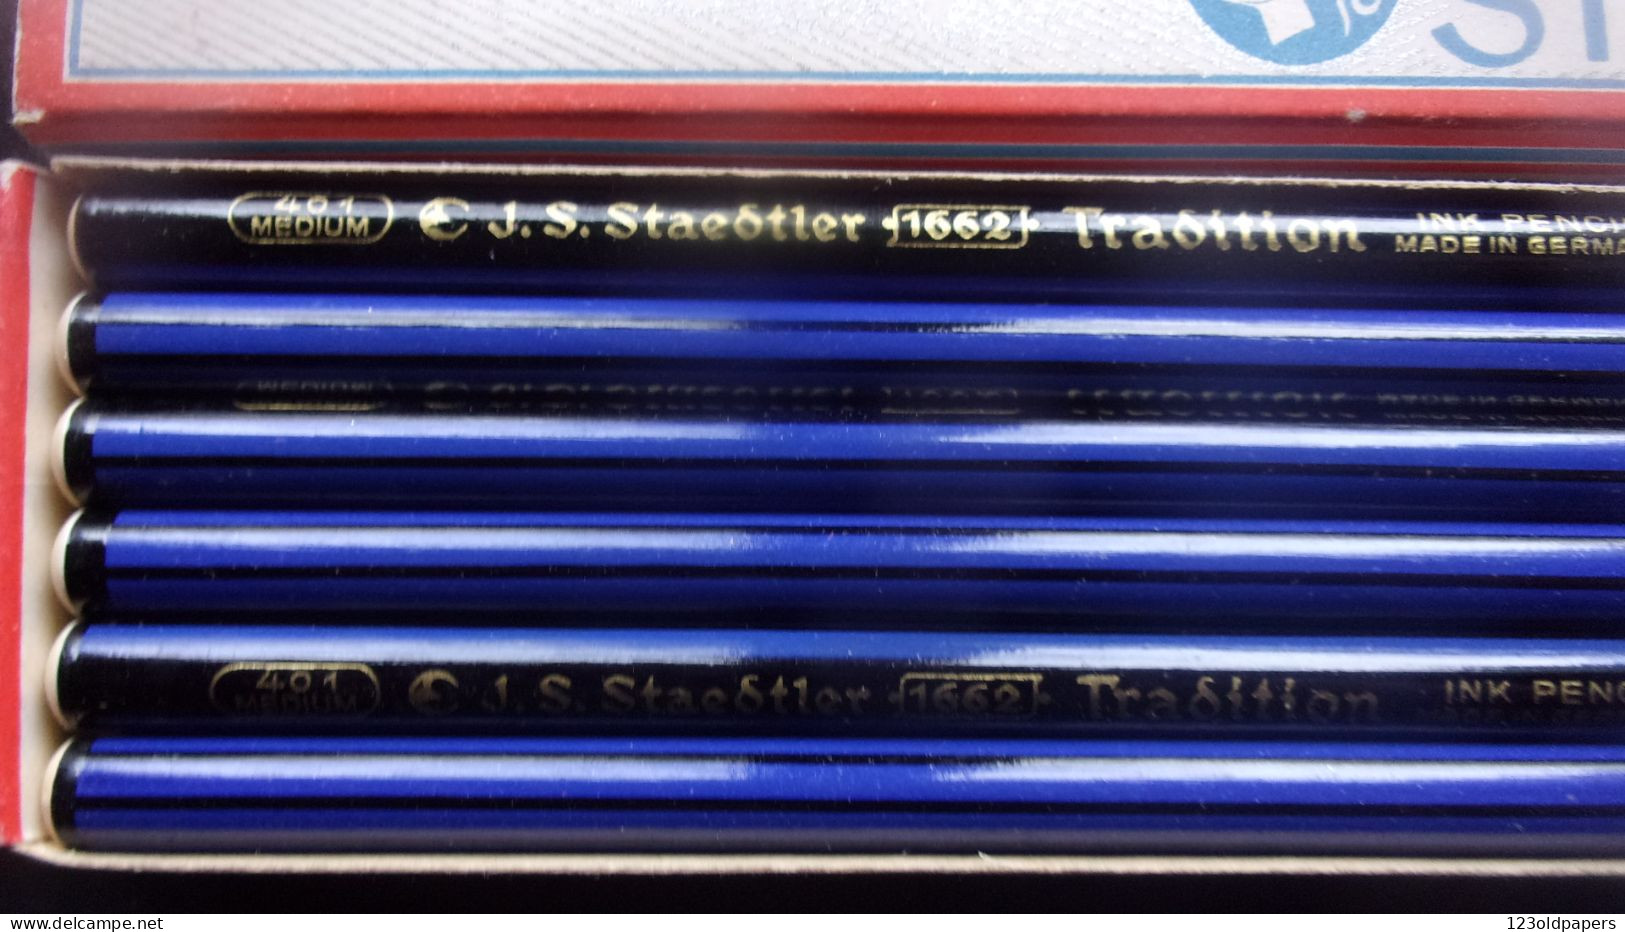 ️ RARE COMME NEUF DANS BOITE ORIGINE STAEDTLER 1662 TRADITION 401 MEDIUM 12 CRAYONS INK PENCIL GERMANY - Stylos